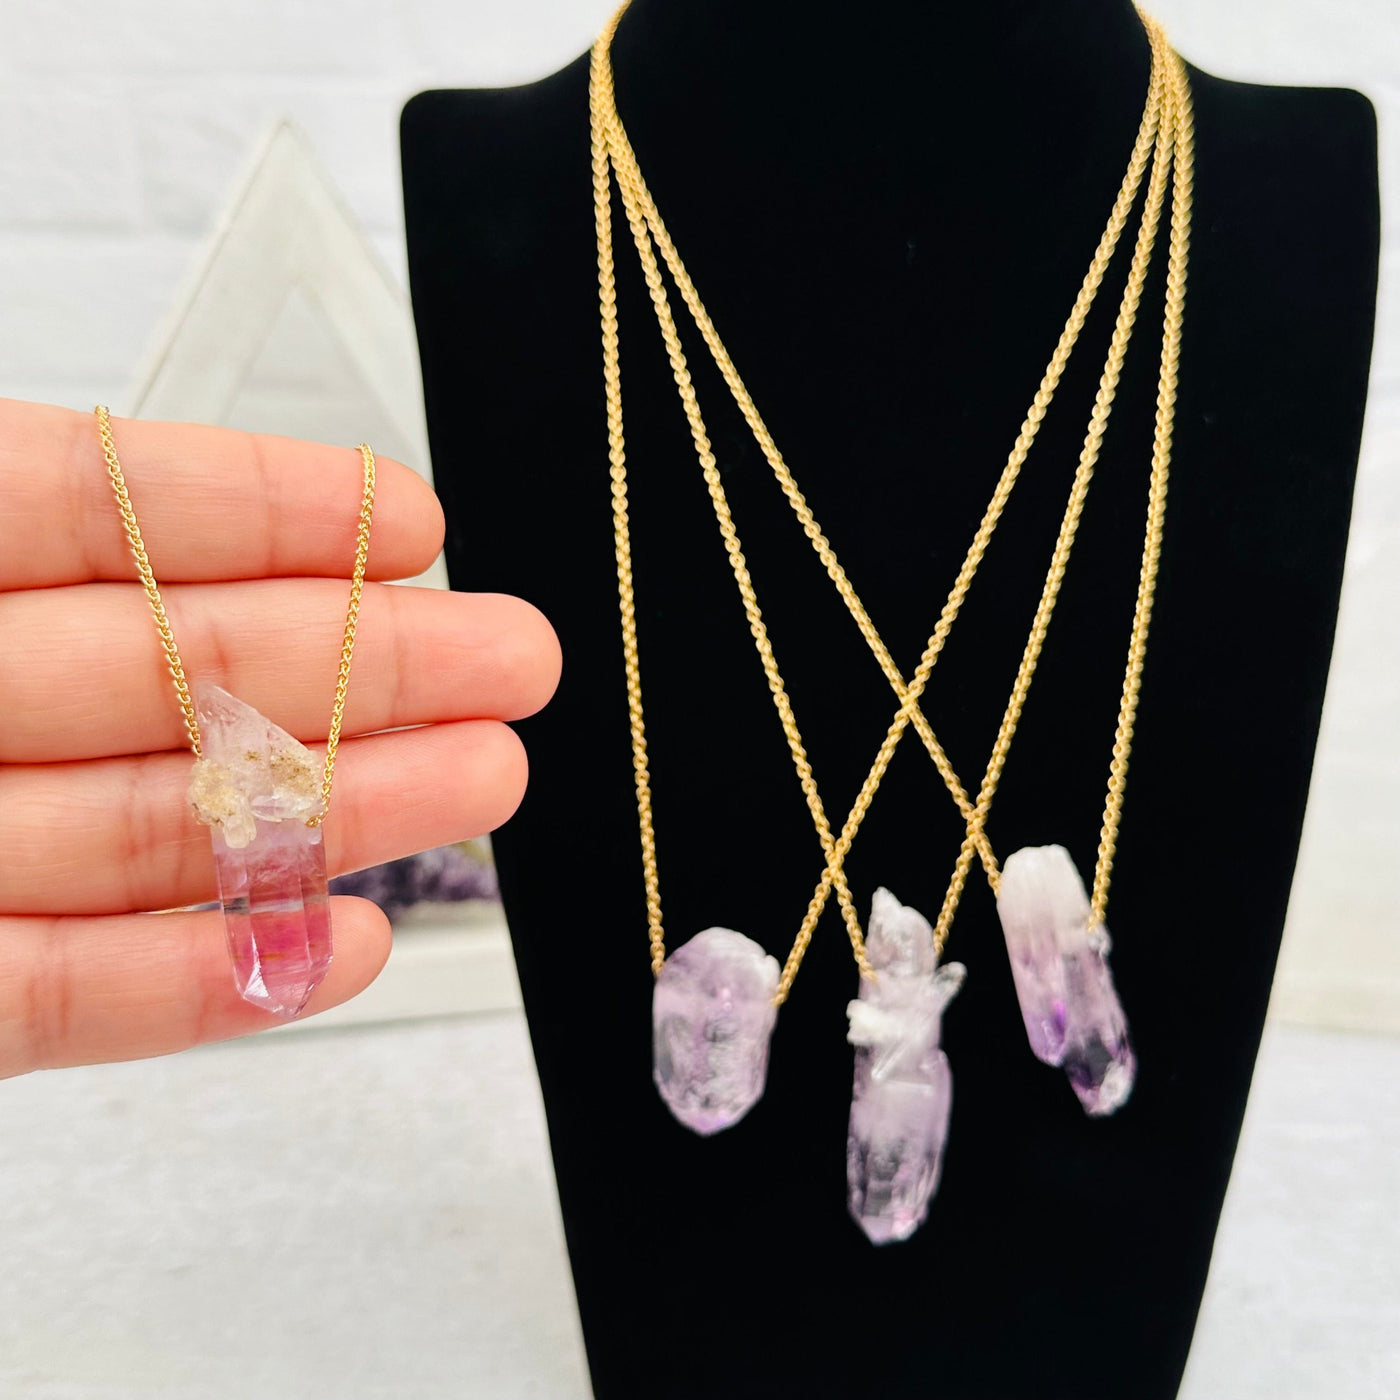 Veracruz Amethyst Necklace in hand for size reference 